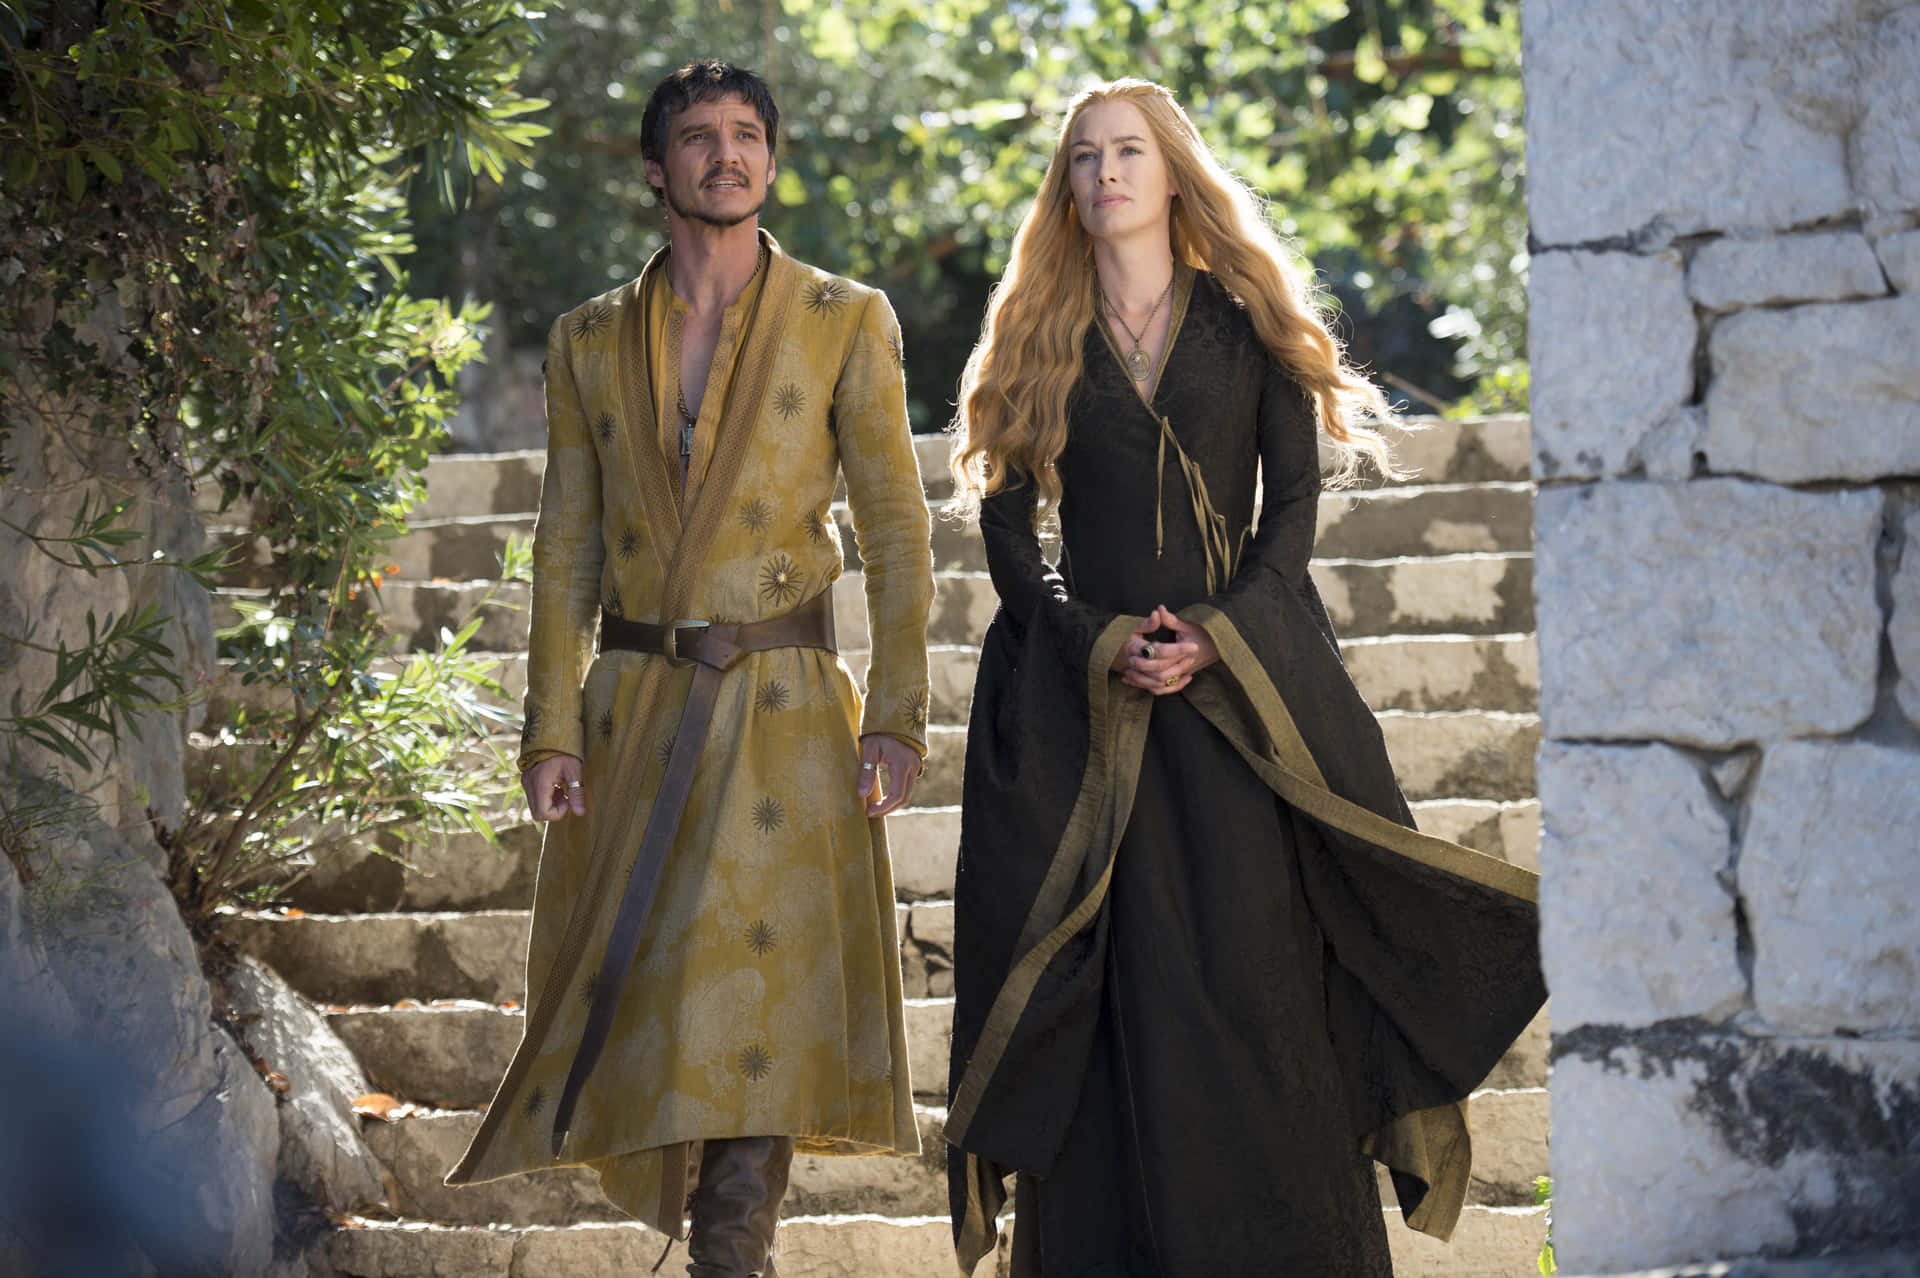 Pedro_ Pascal_and_ Costar_in_ Medieval_ Setting Wallpaper